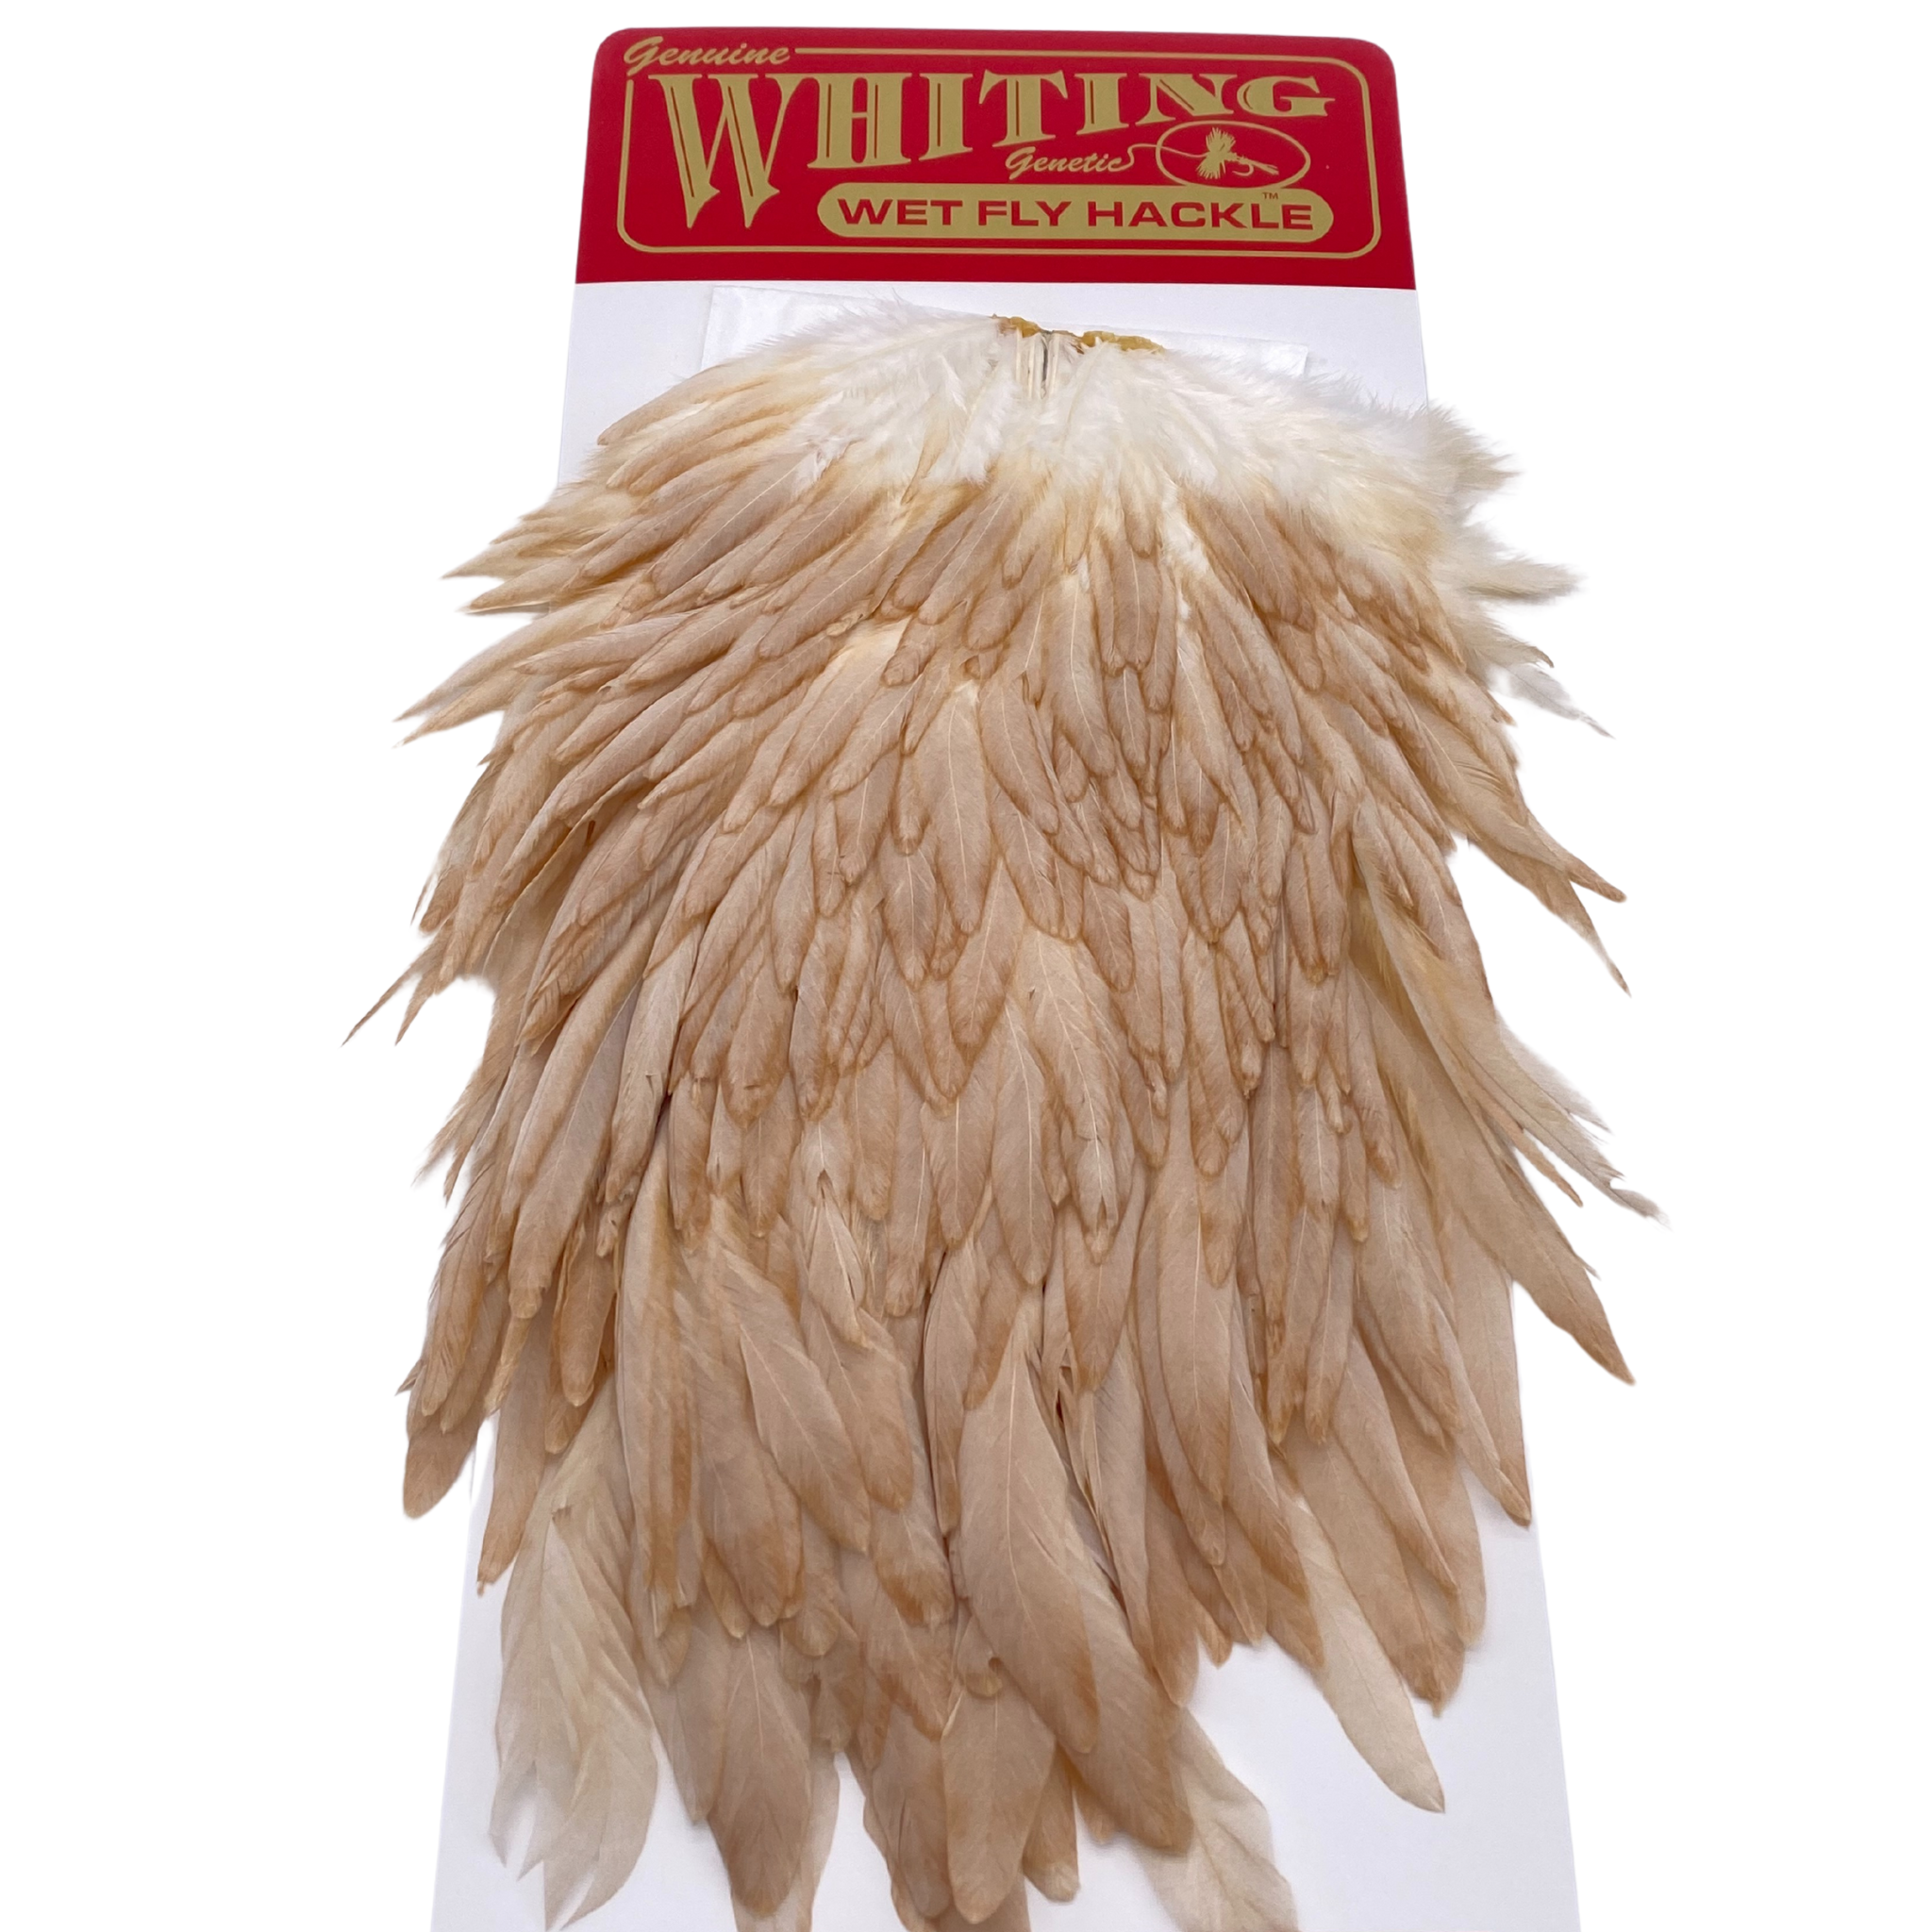 Whiting Hen Saddle - ( WHITING FARMS, INC)